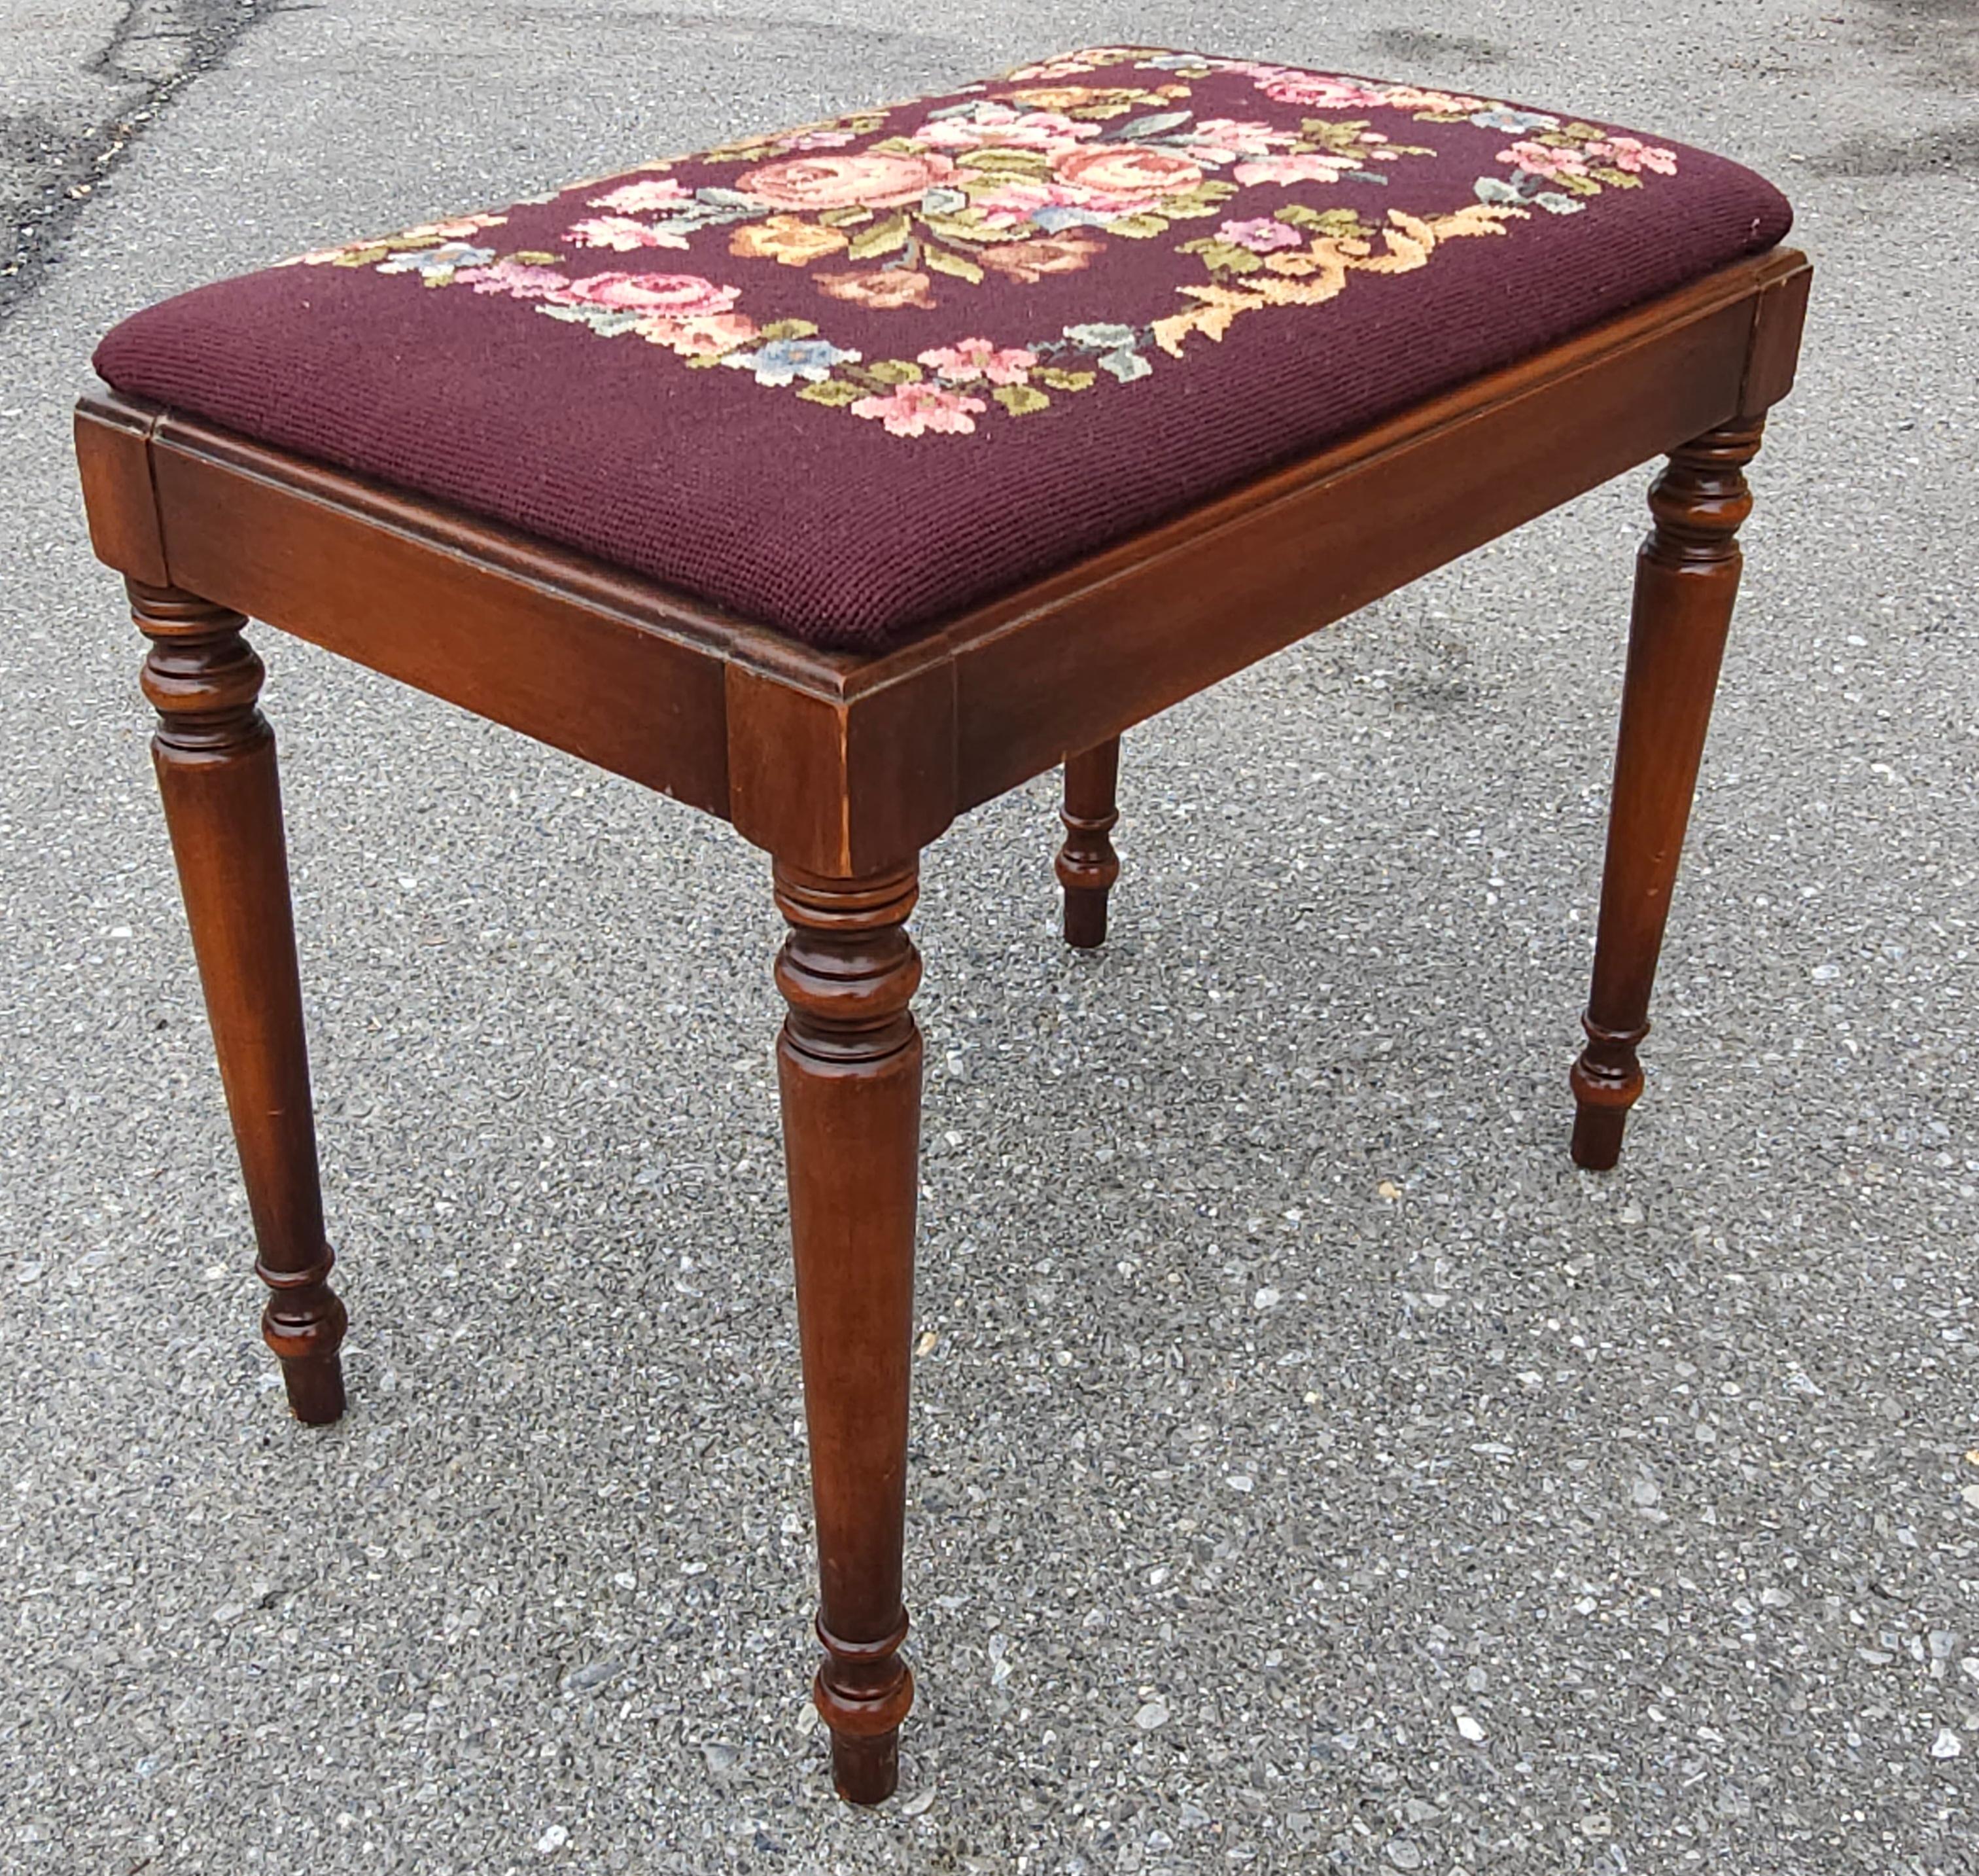 Upholstery Mid 20th Century Kindel Furniture Oxford Cherry & Needlepoint Upholstered Bench For Sale